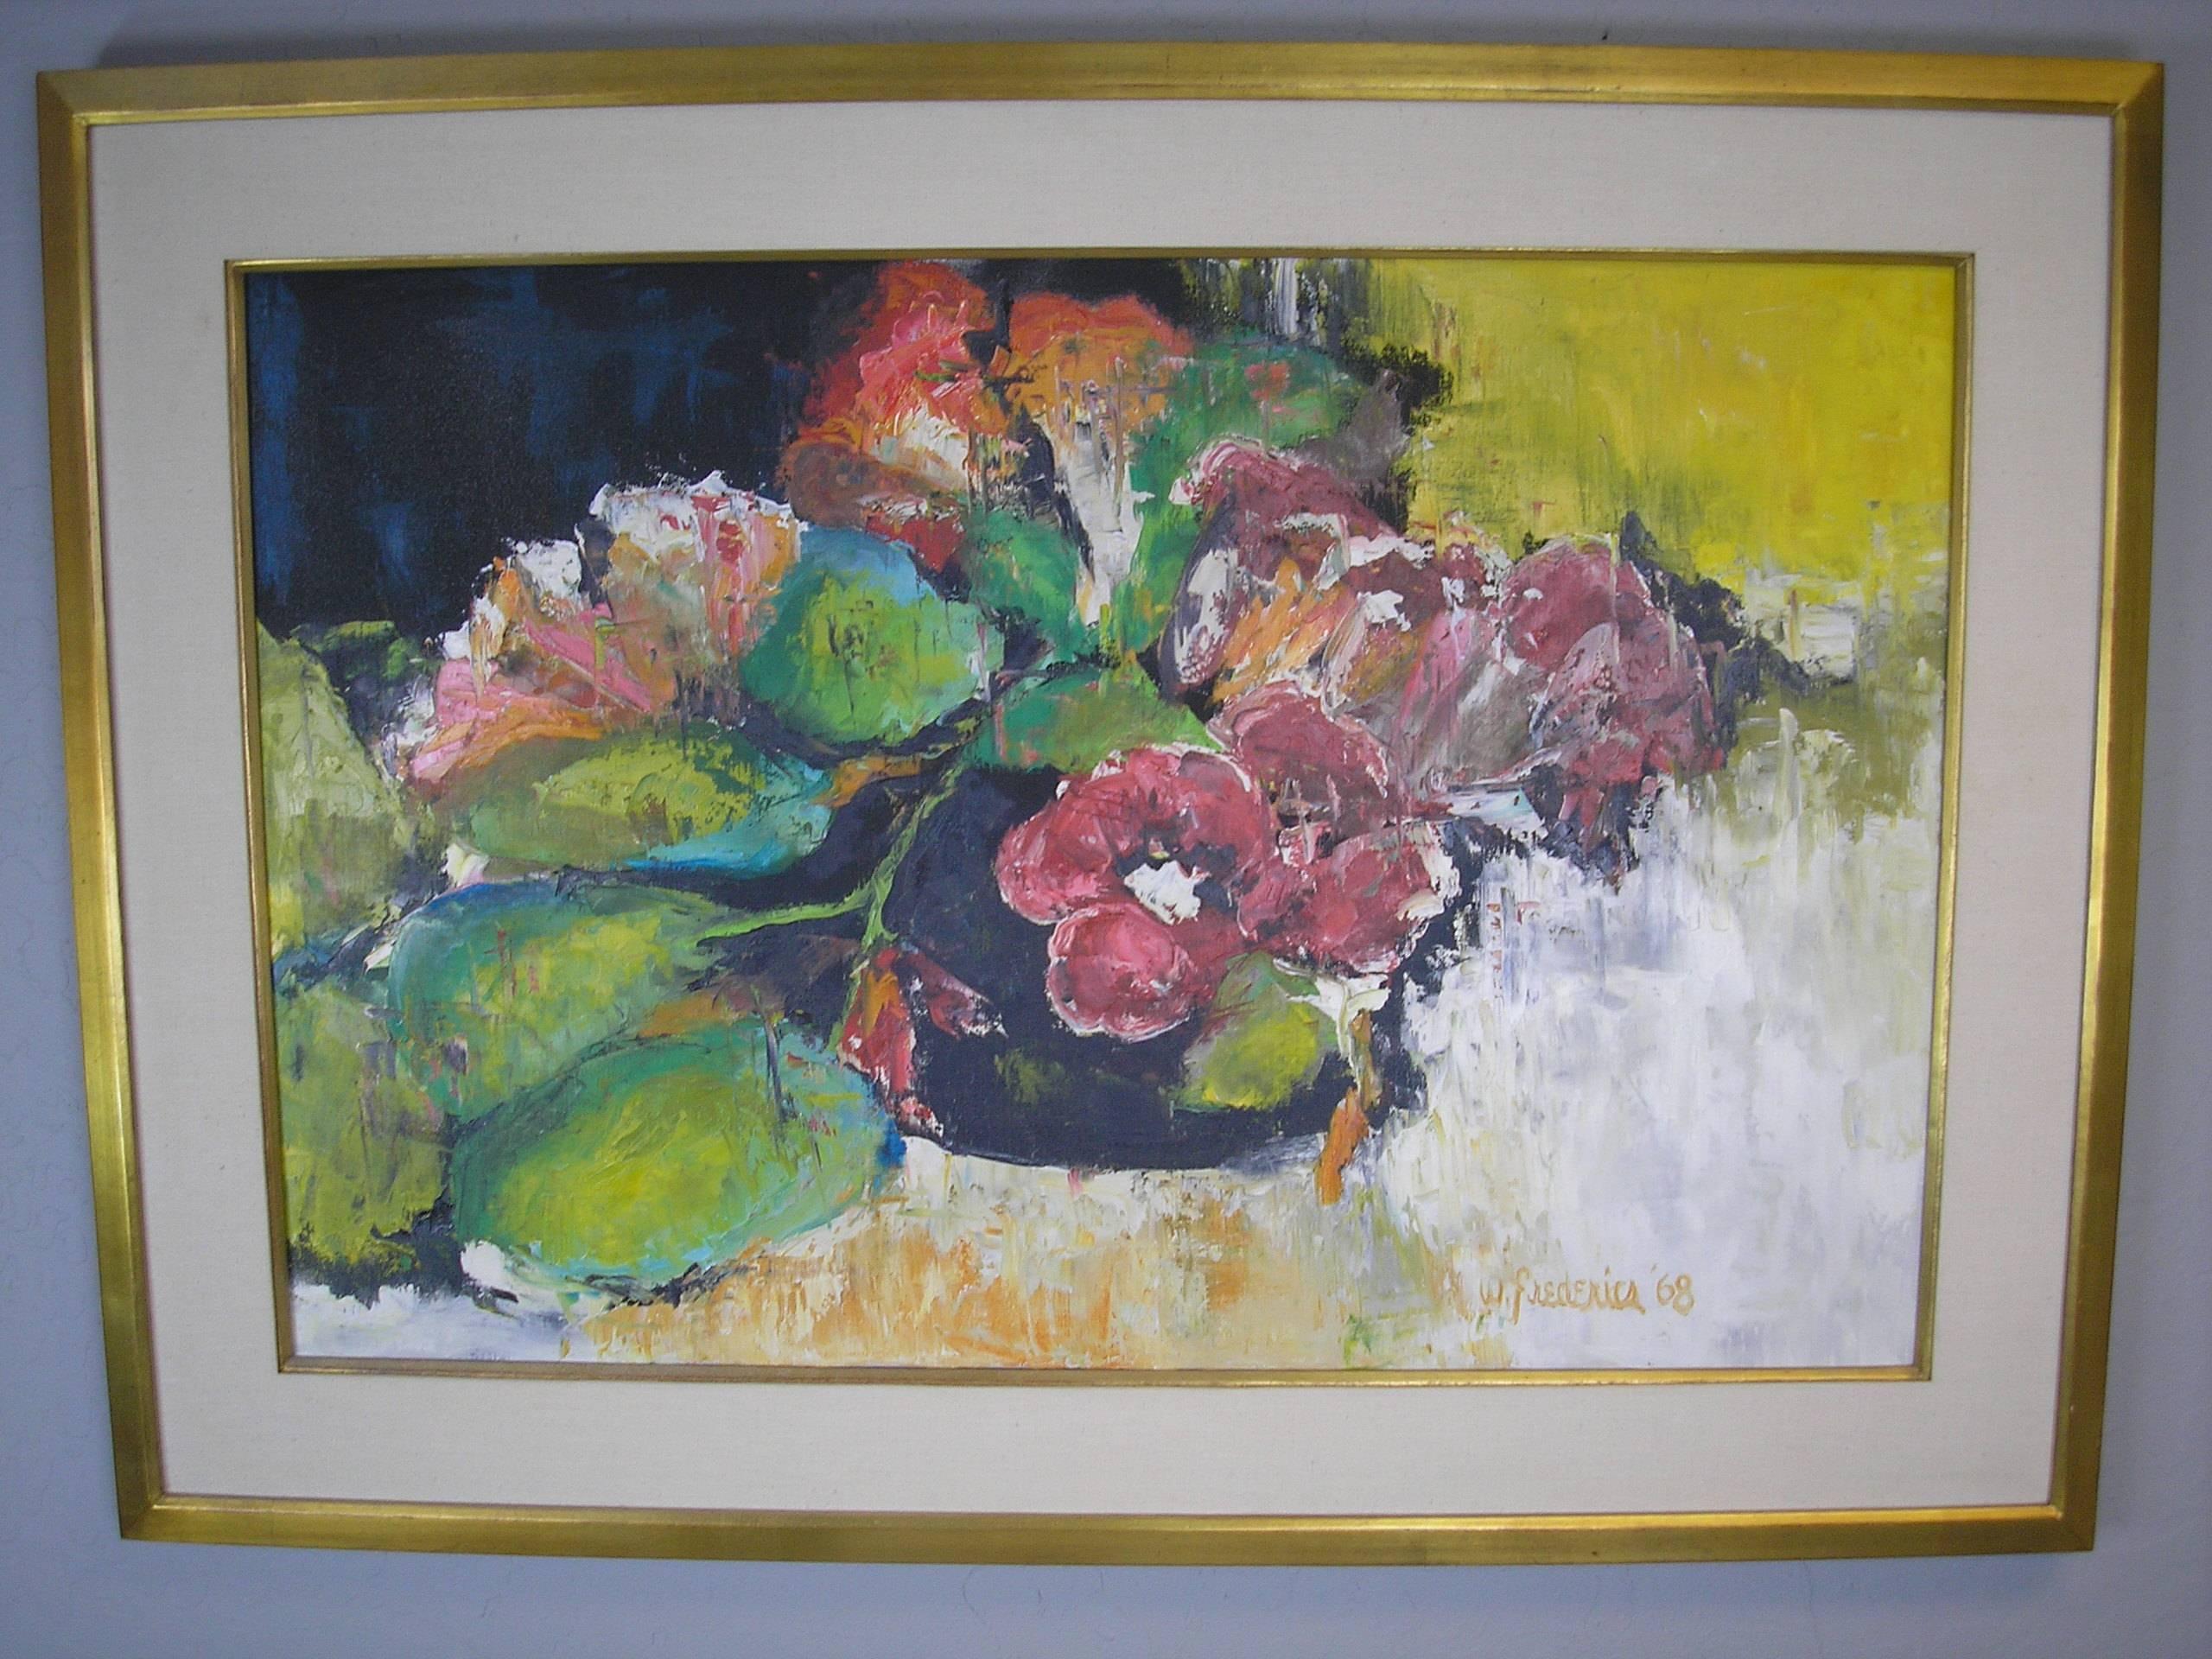 Hand-Painted Original Acrylic Painting by W. Frederika, 1968 For Sale